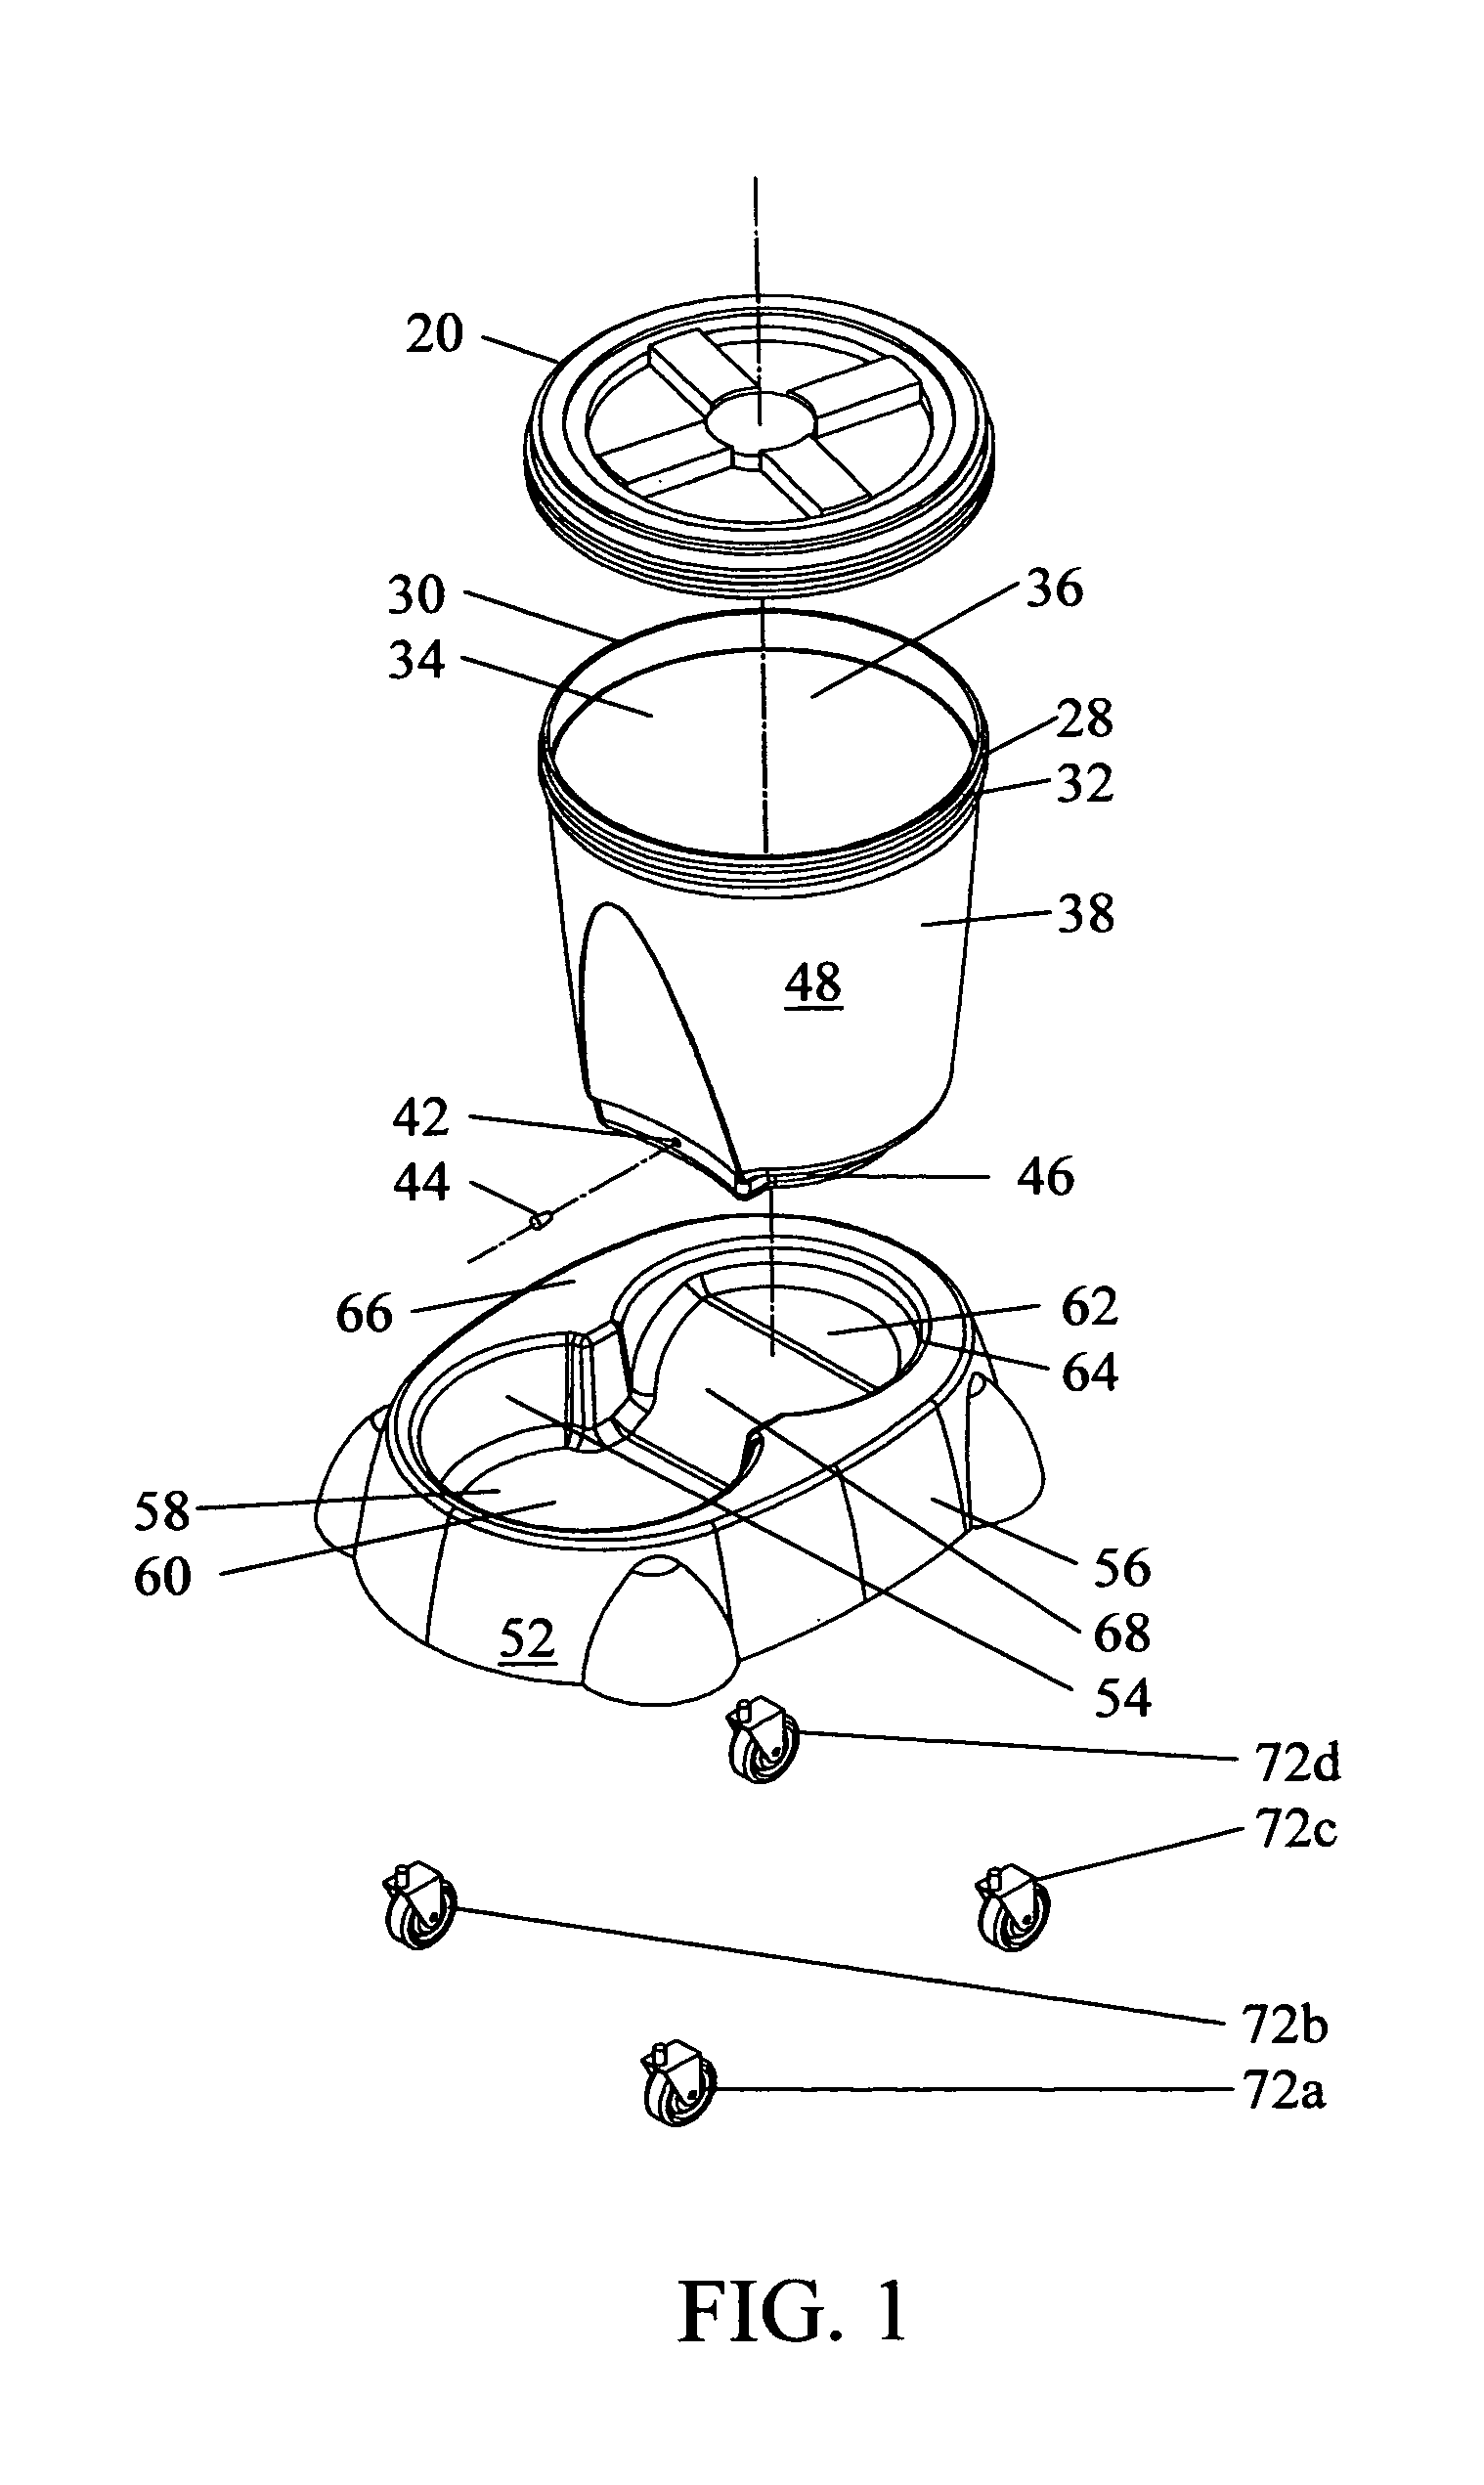 Animal feeding and watering device